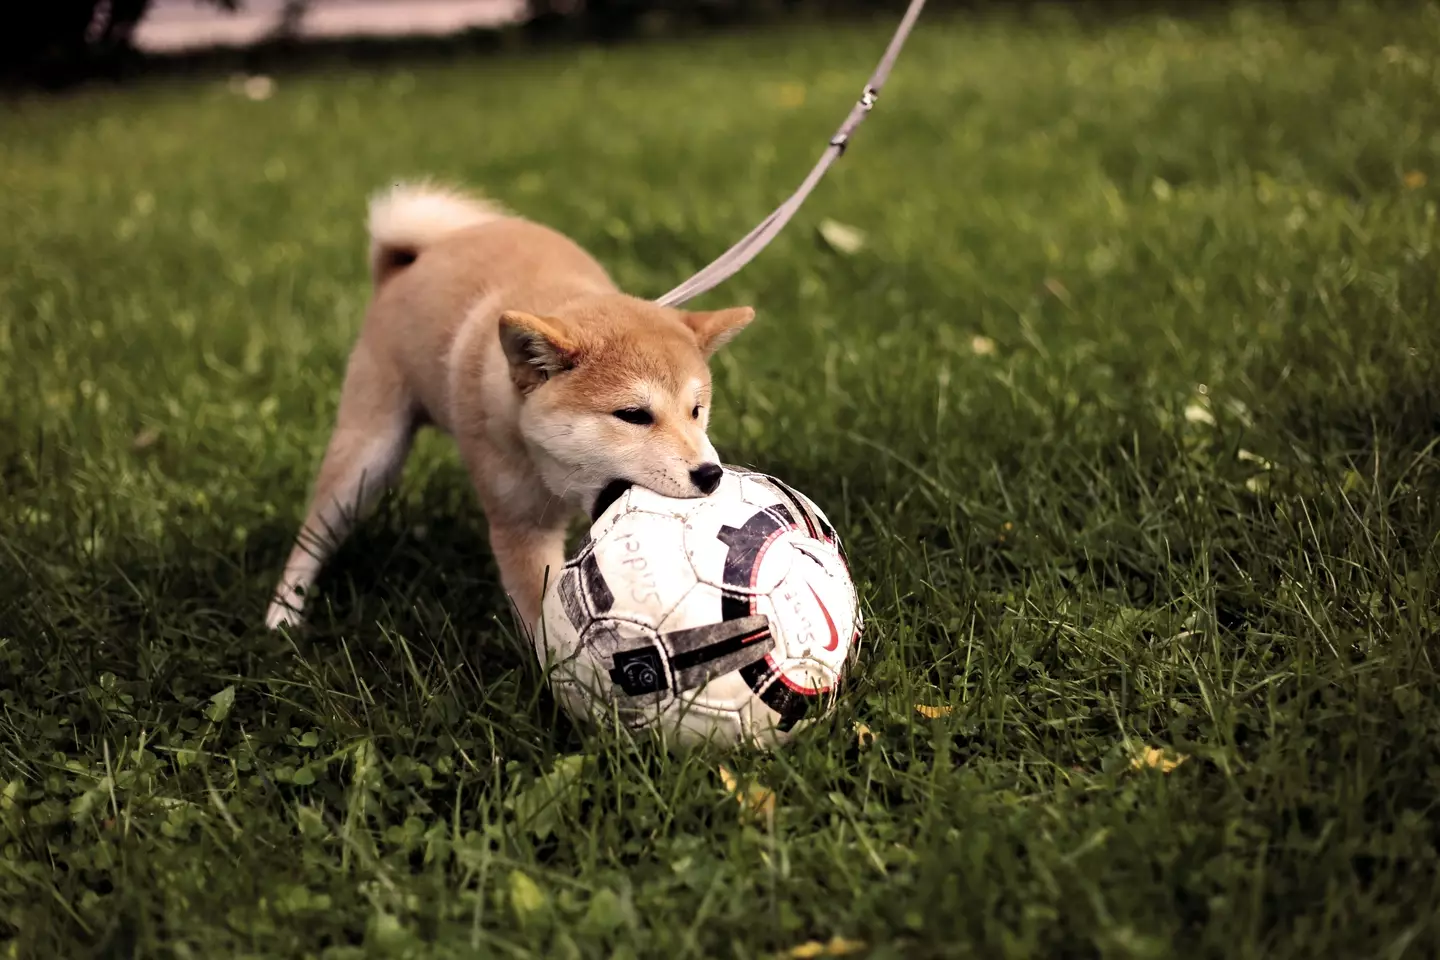 “If people do want to use balls because it’s good for their dog’s training, we always say you have to go for a ball which is larger than their mouth, even bigger than you imagine - like a football which is plenty big enough," Nina says ( Luiza Sayfullina on Unsplash).